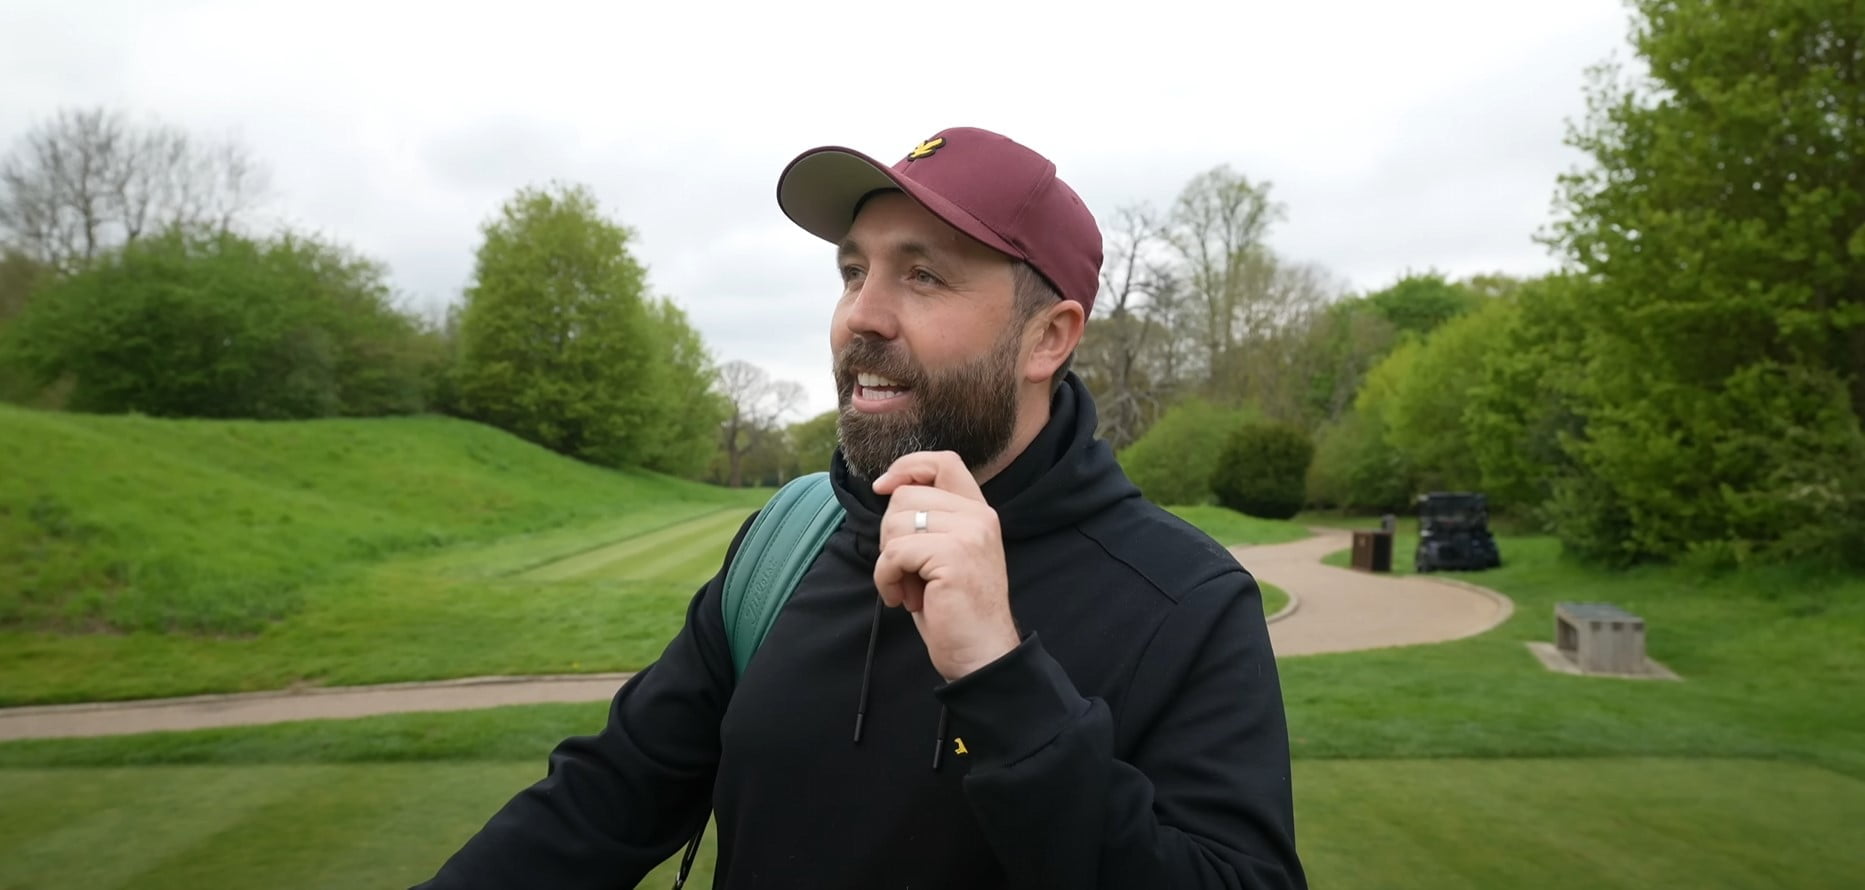 Explore Rick Shiels' rise: from Myerscough College to PGA pro and YouTube star. Uncover his impact on golf with reviews & popular podcast.